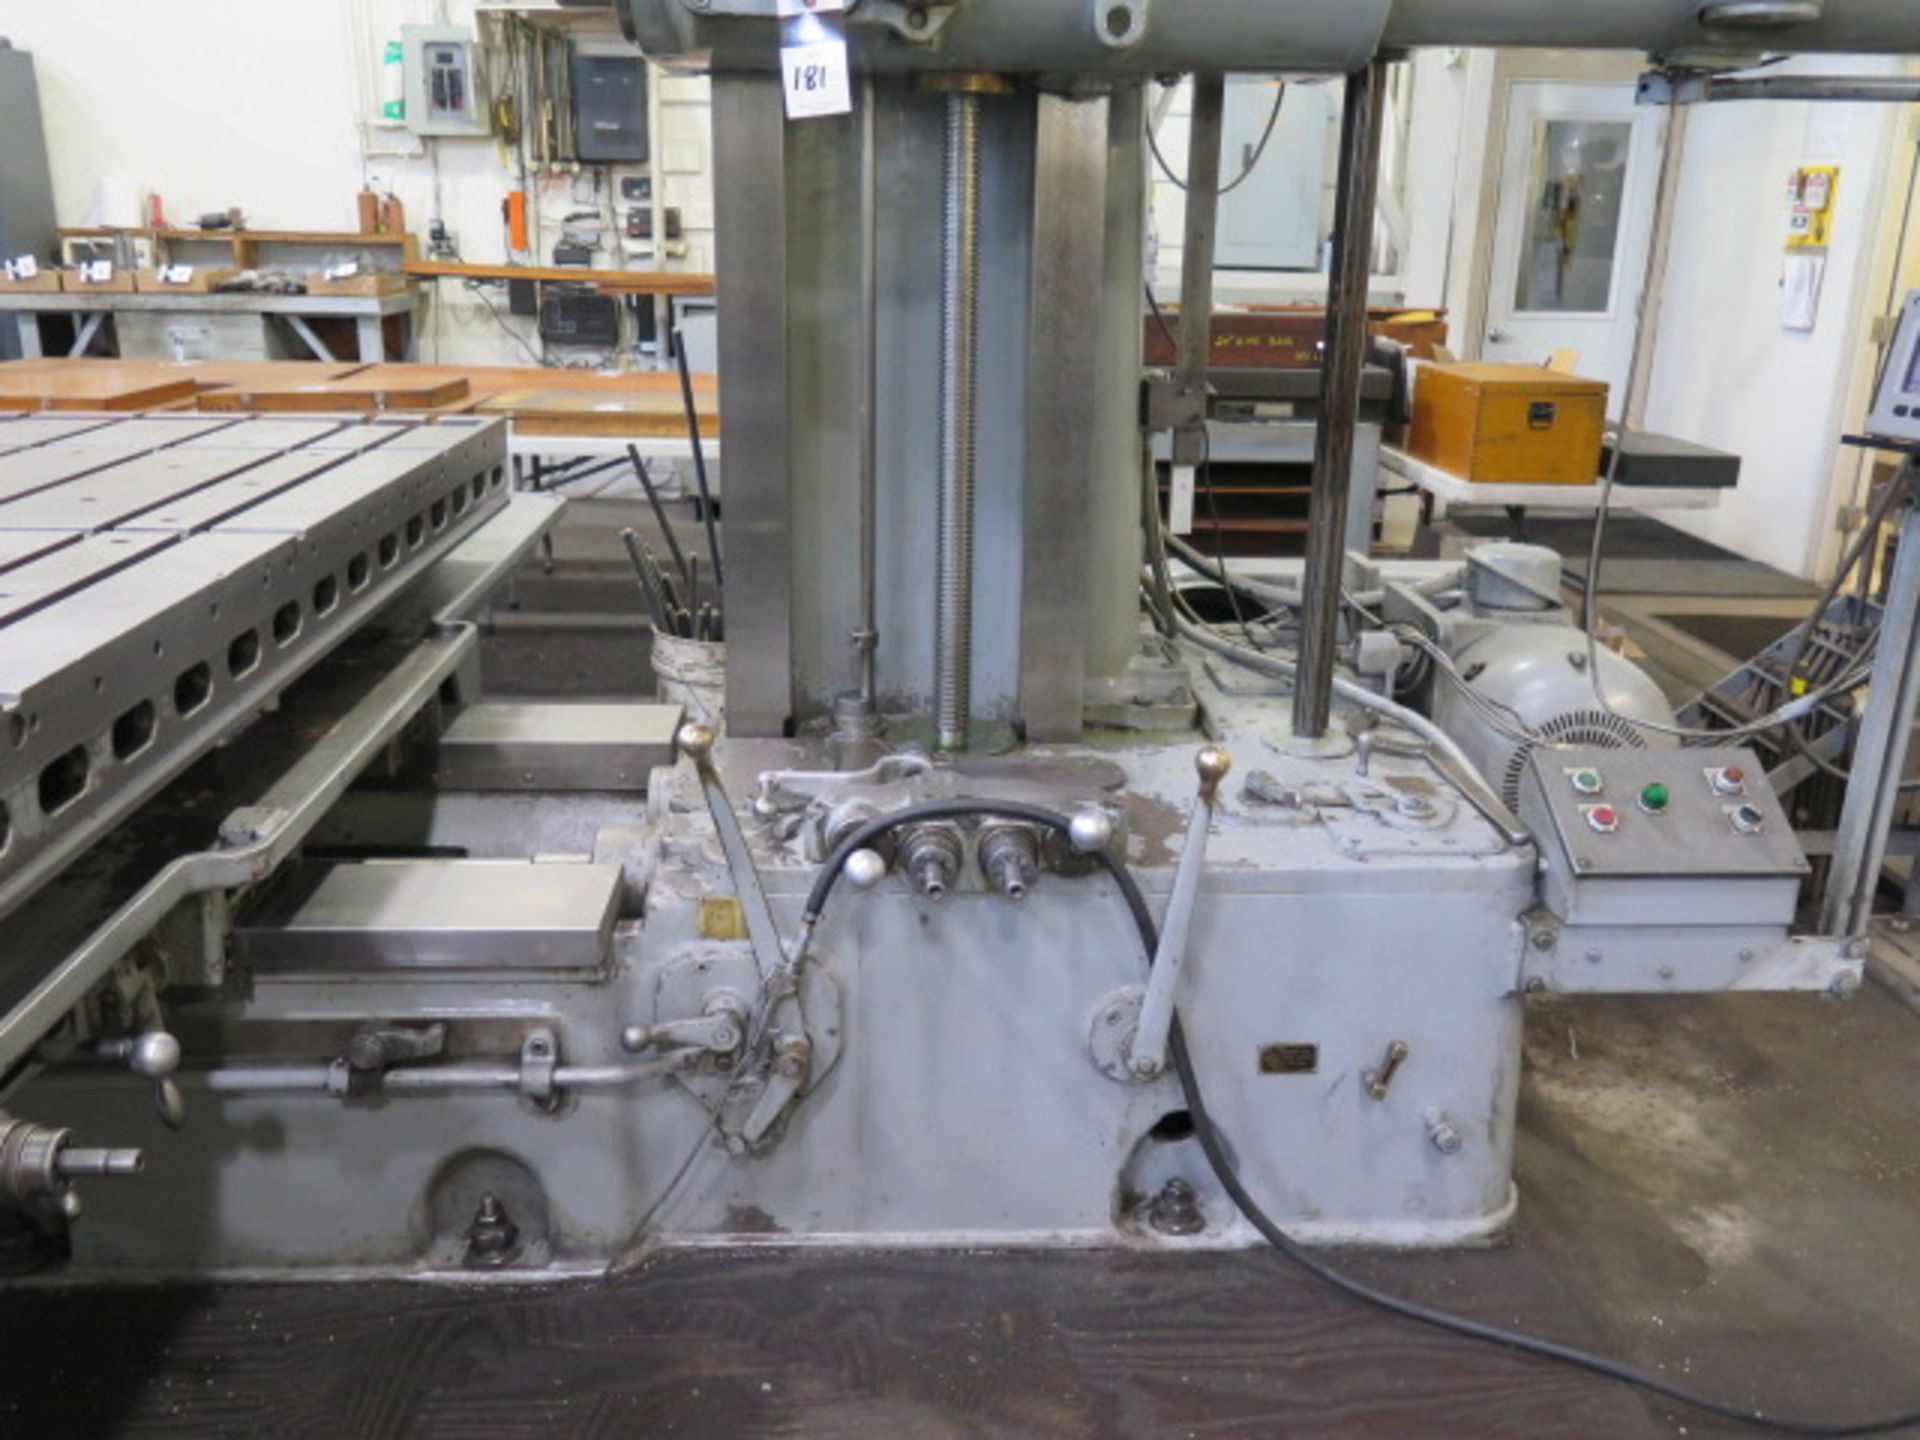 Giddings & Lewis 340-T Horizontal Boring Mill w/ Acu-Rite 4-Axis DRO, 4” Spindle, SOLD AS IS - Image 6 of 16